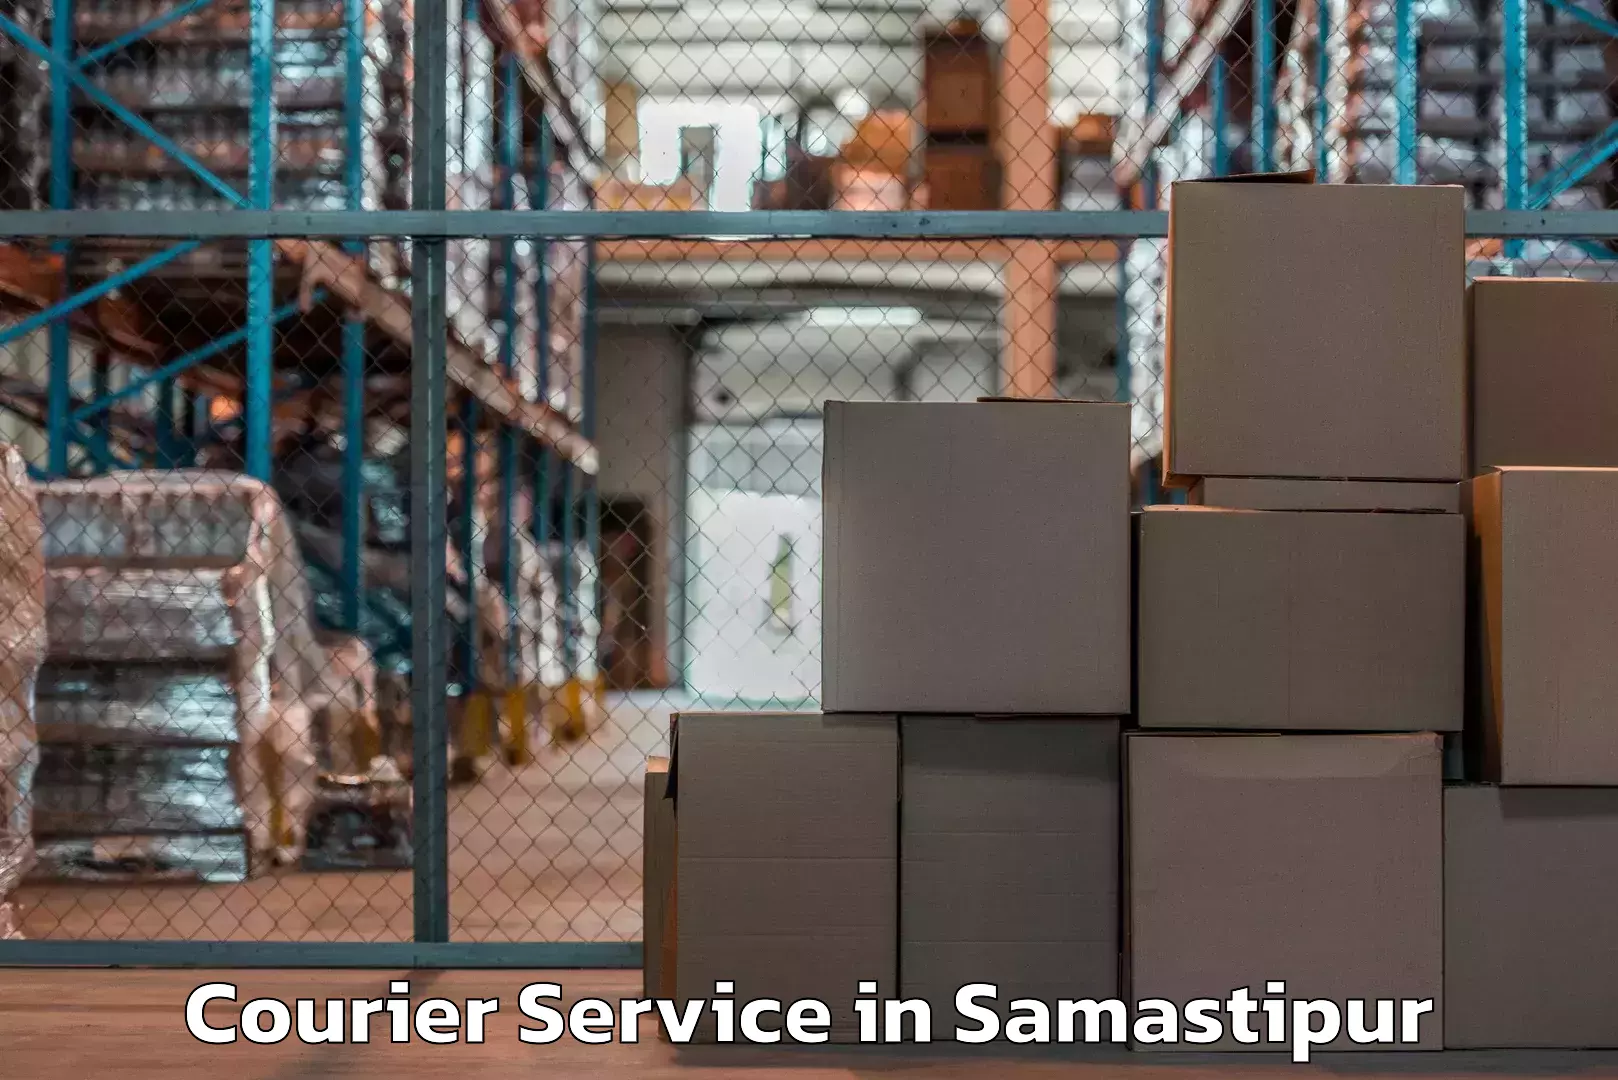 24/7 courier service in Samastipur